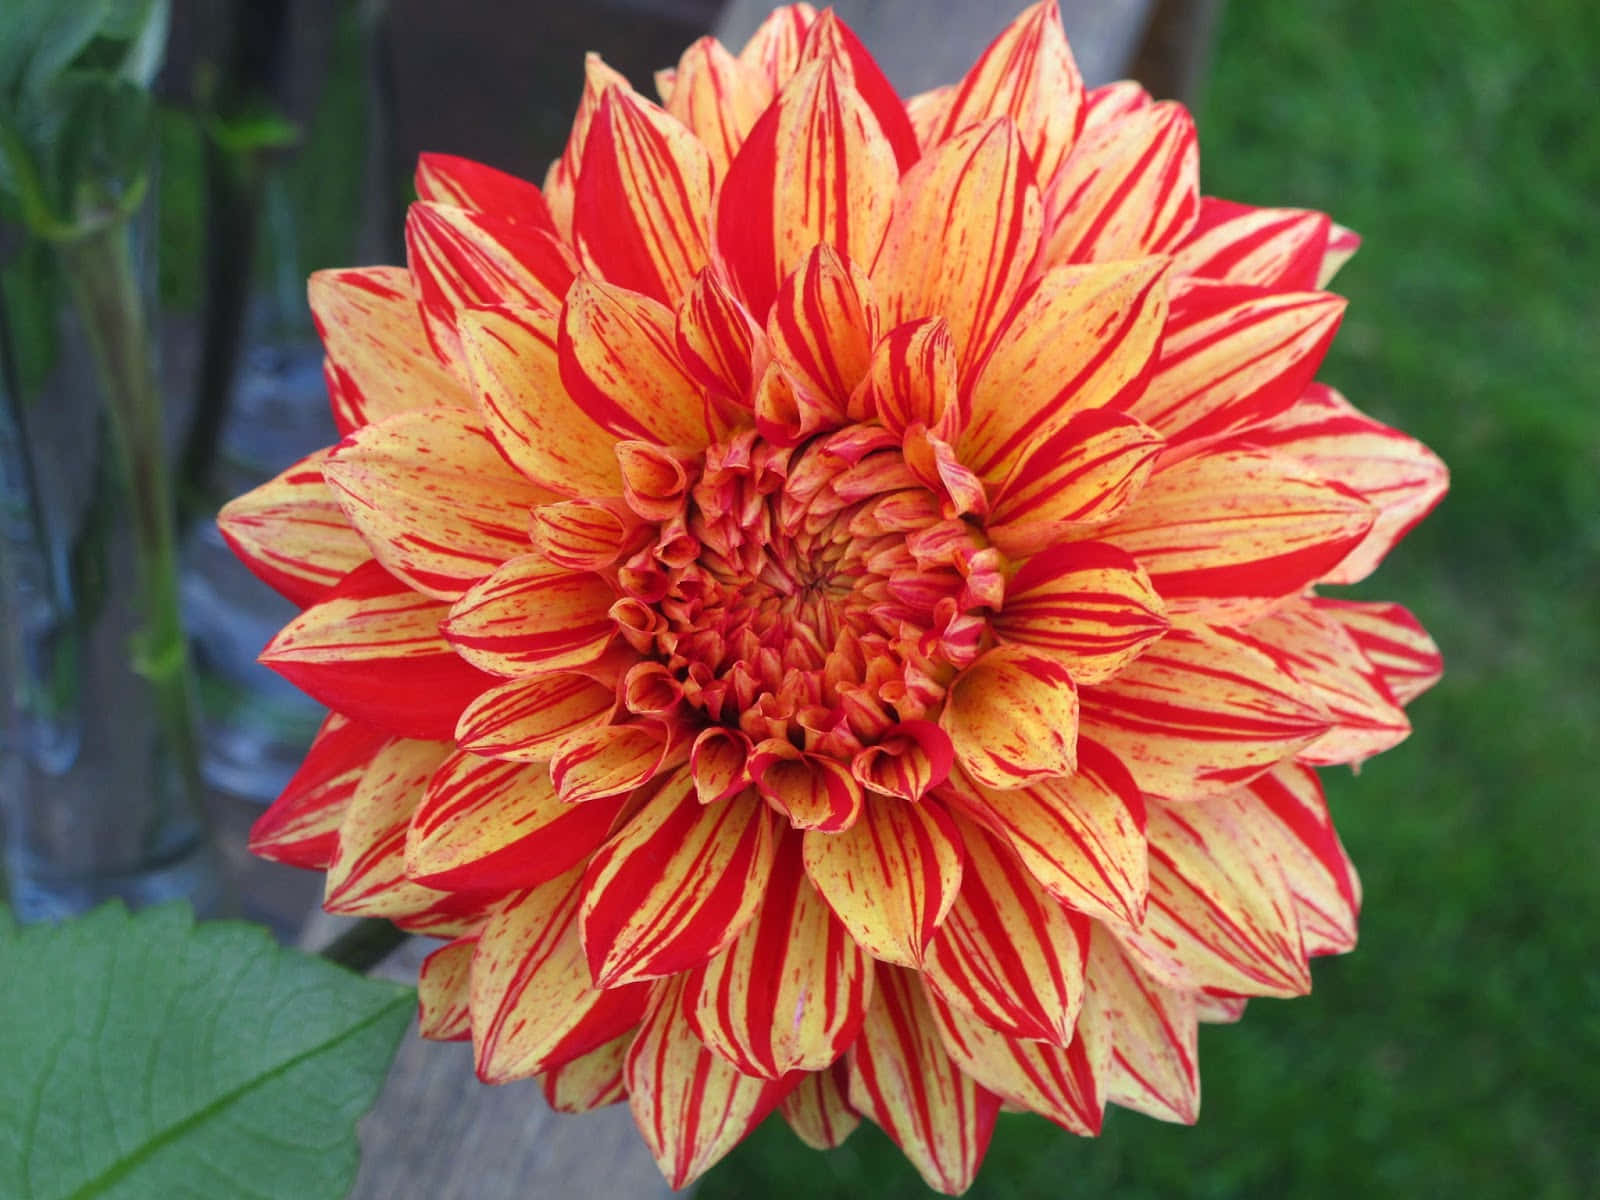 A delicate and intricate Dahlia flower